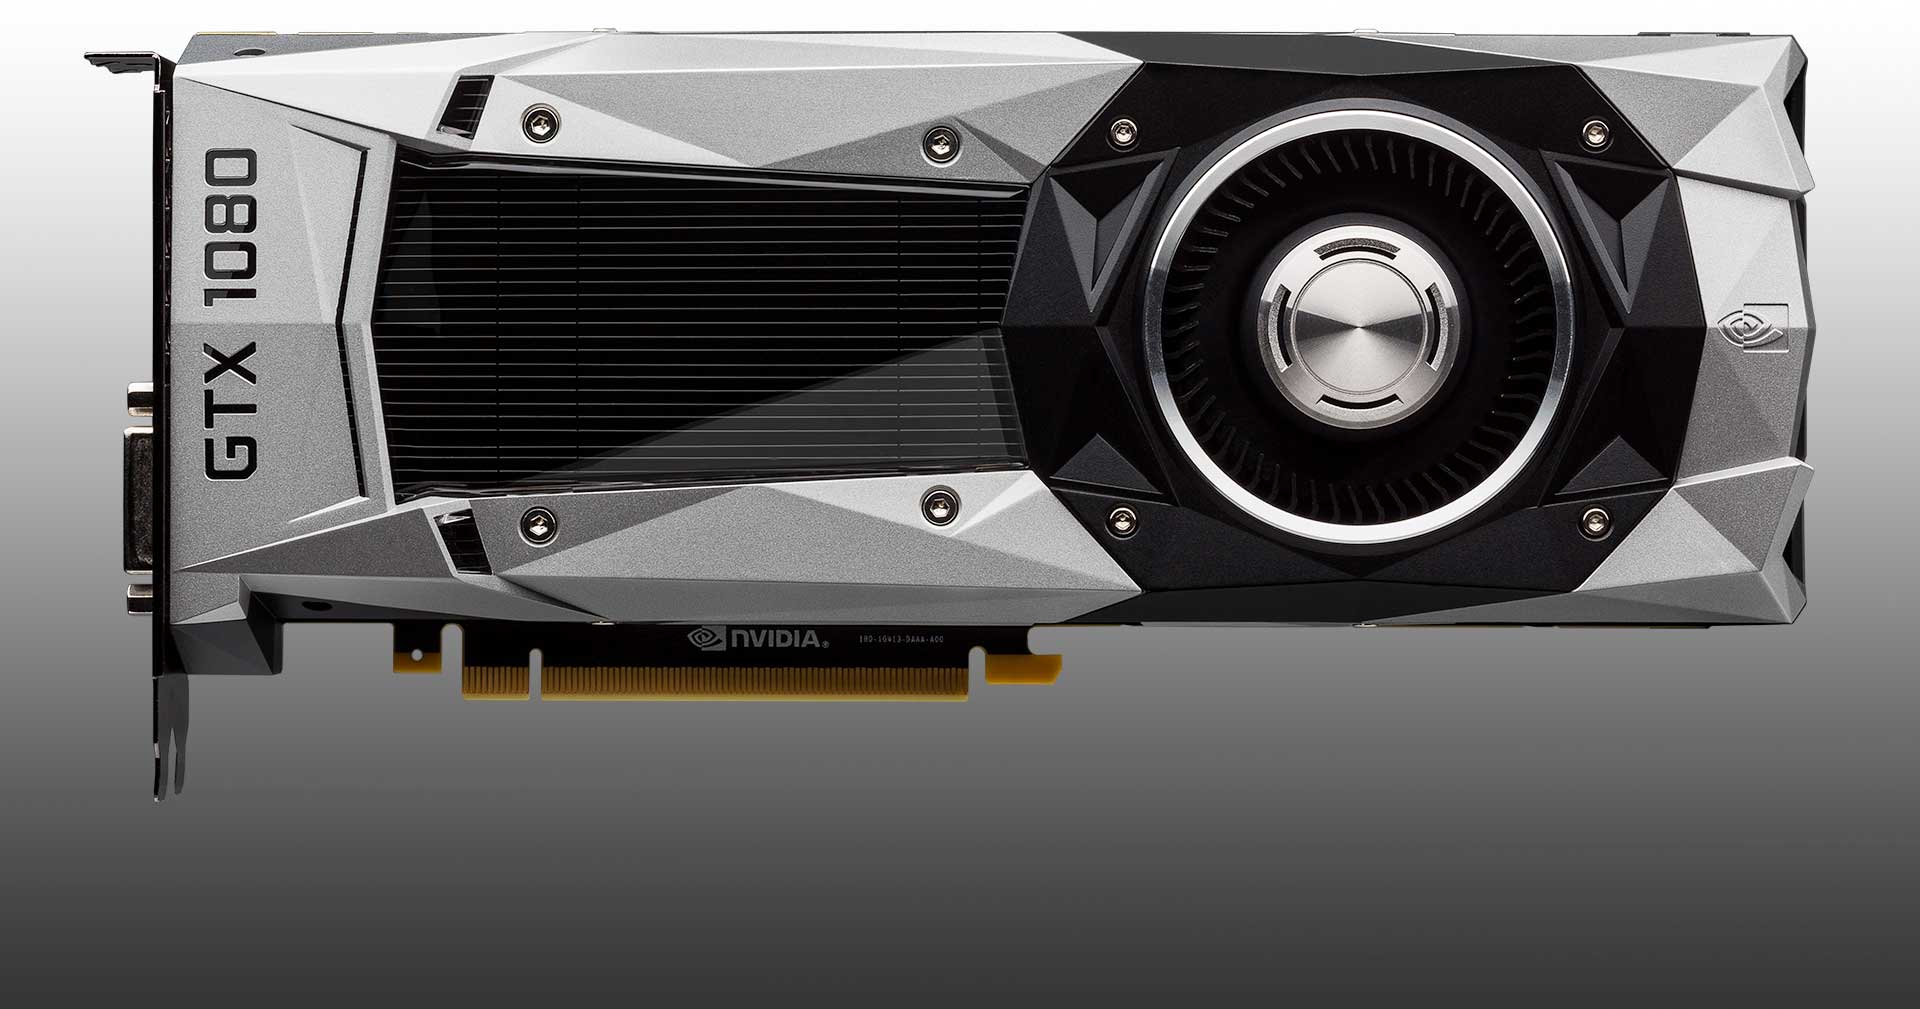 NVIDIA 1080 Performance Review: Head to Head Against the 980 Ti – Page 3 – Road to VR